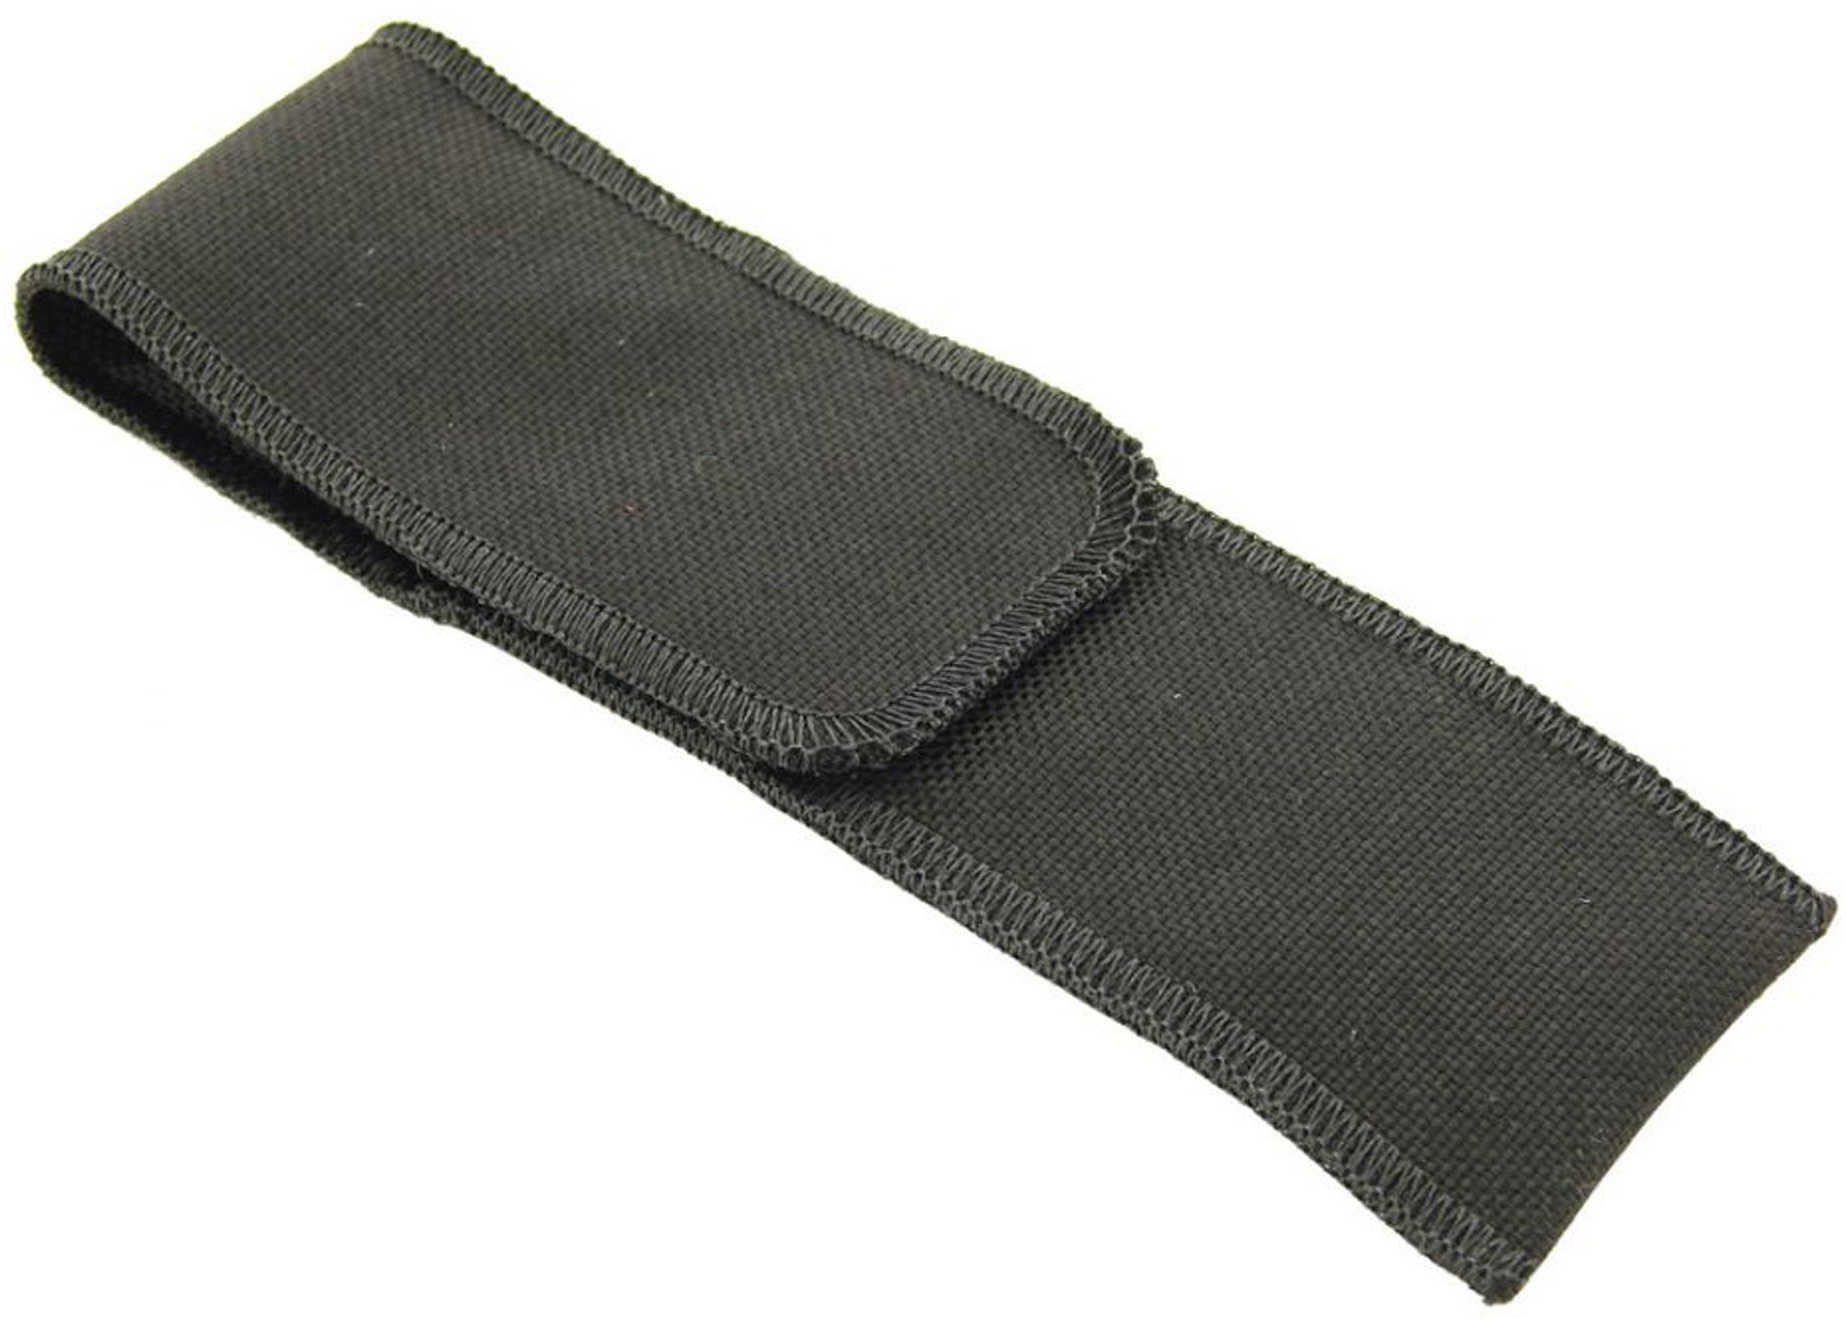 Maglite Holster Nylon Full Flap for AA AM2A056